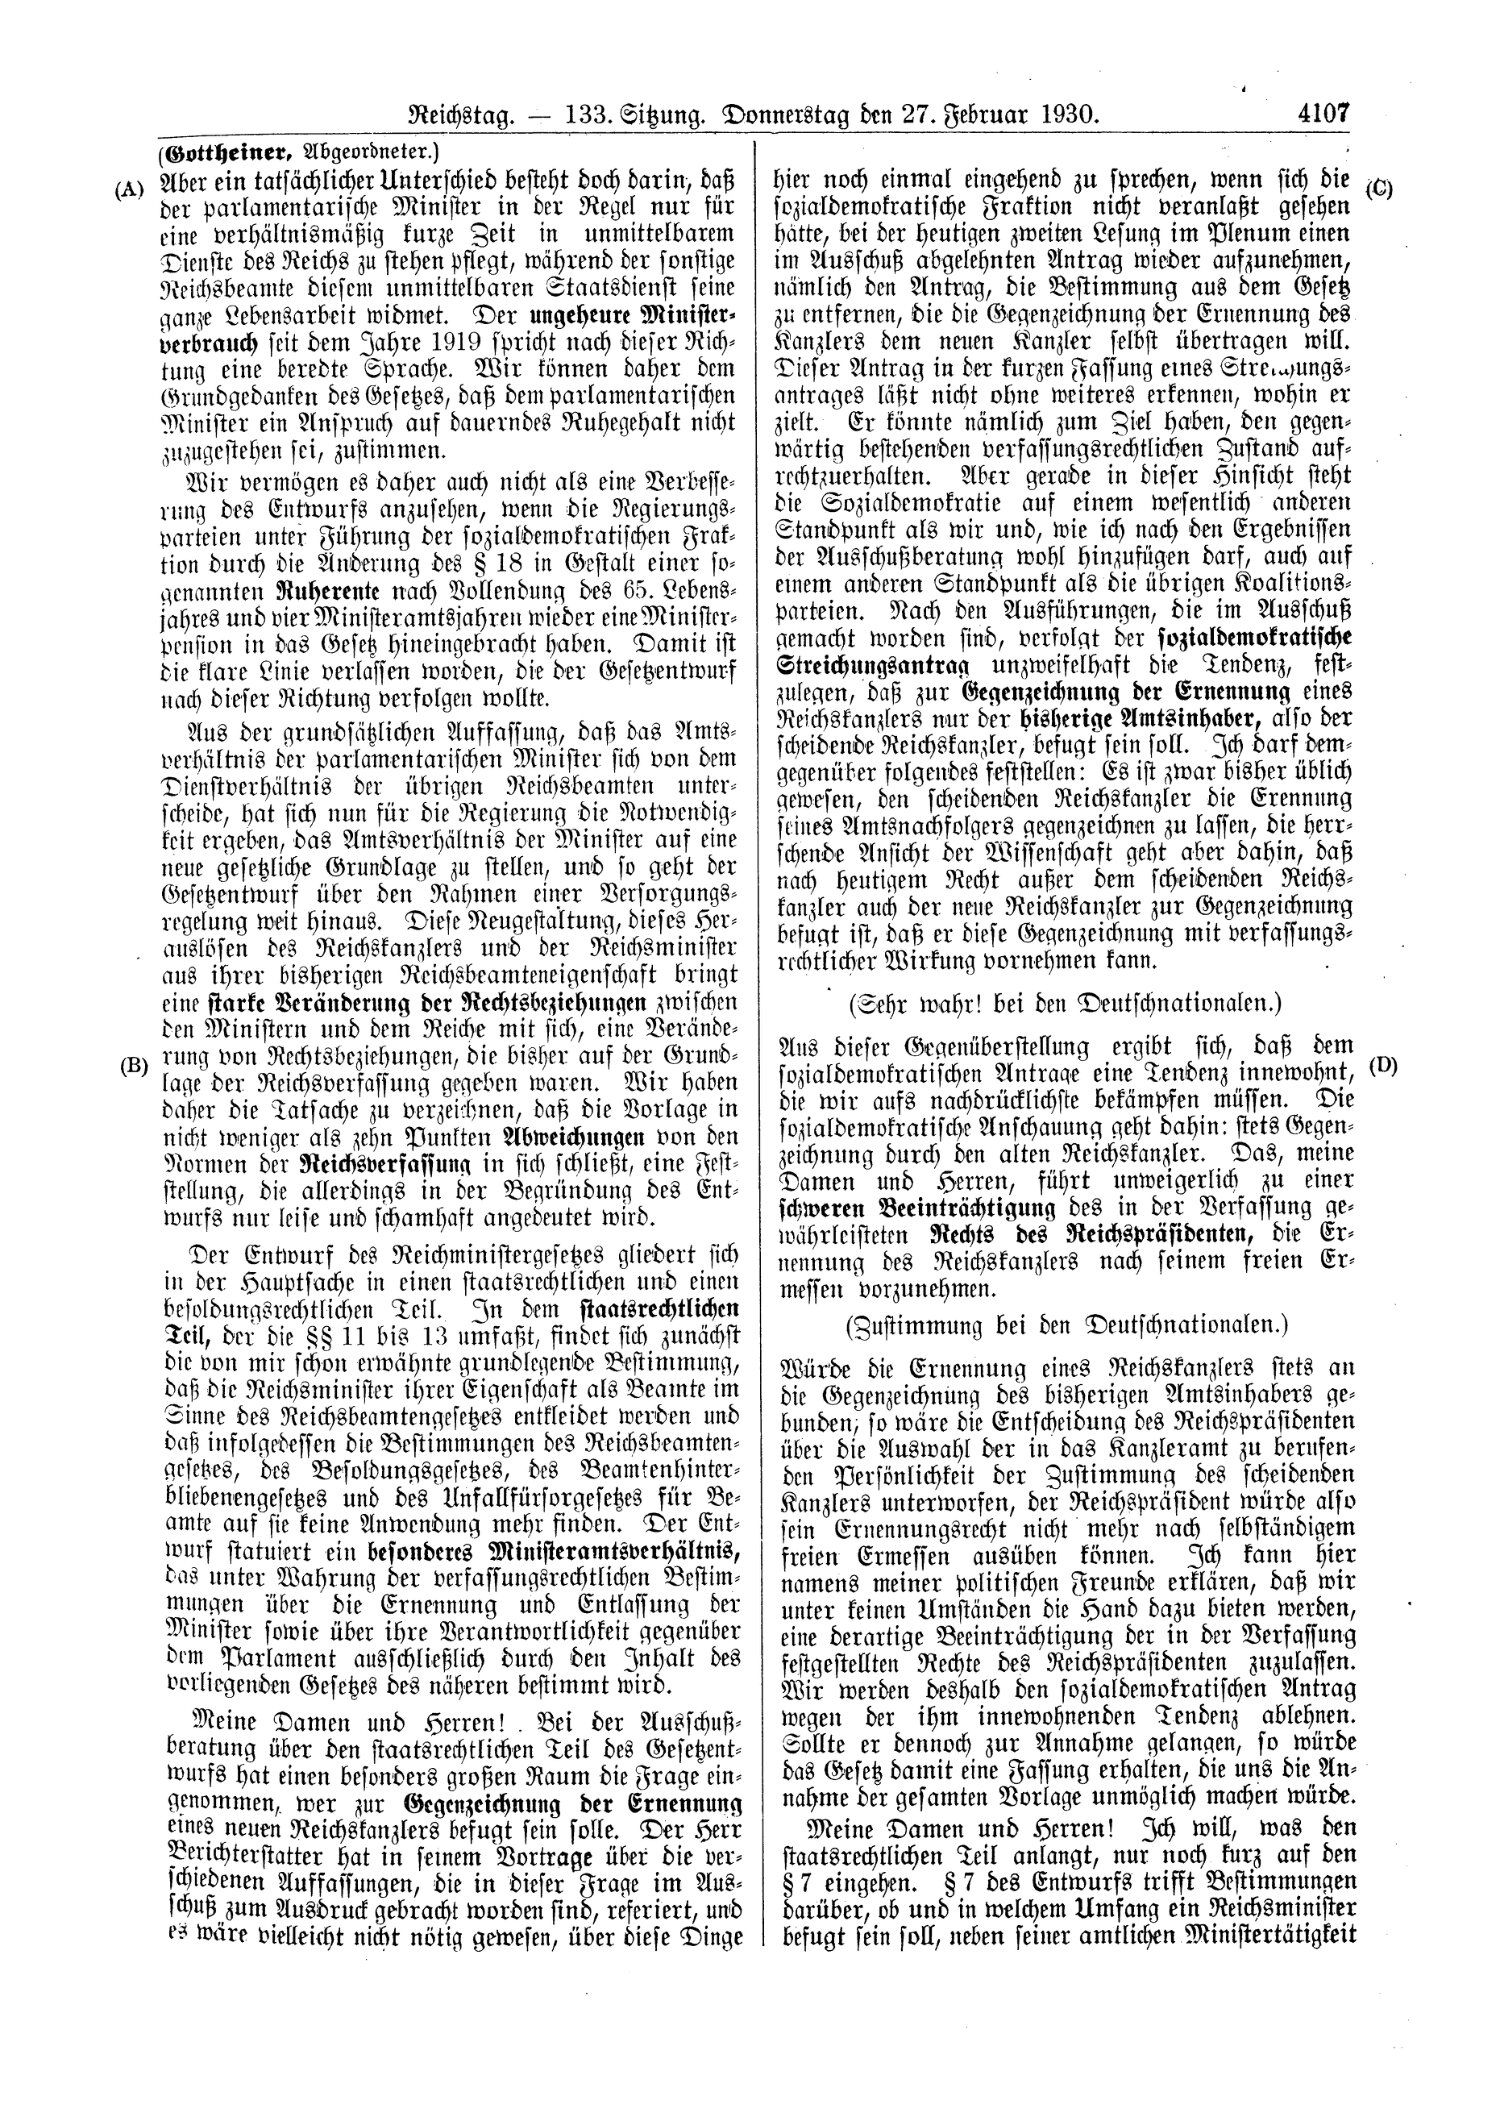 Scan of page 4107